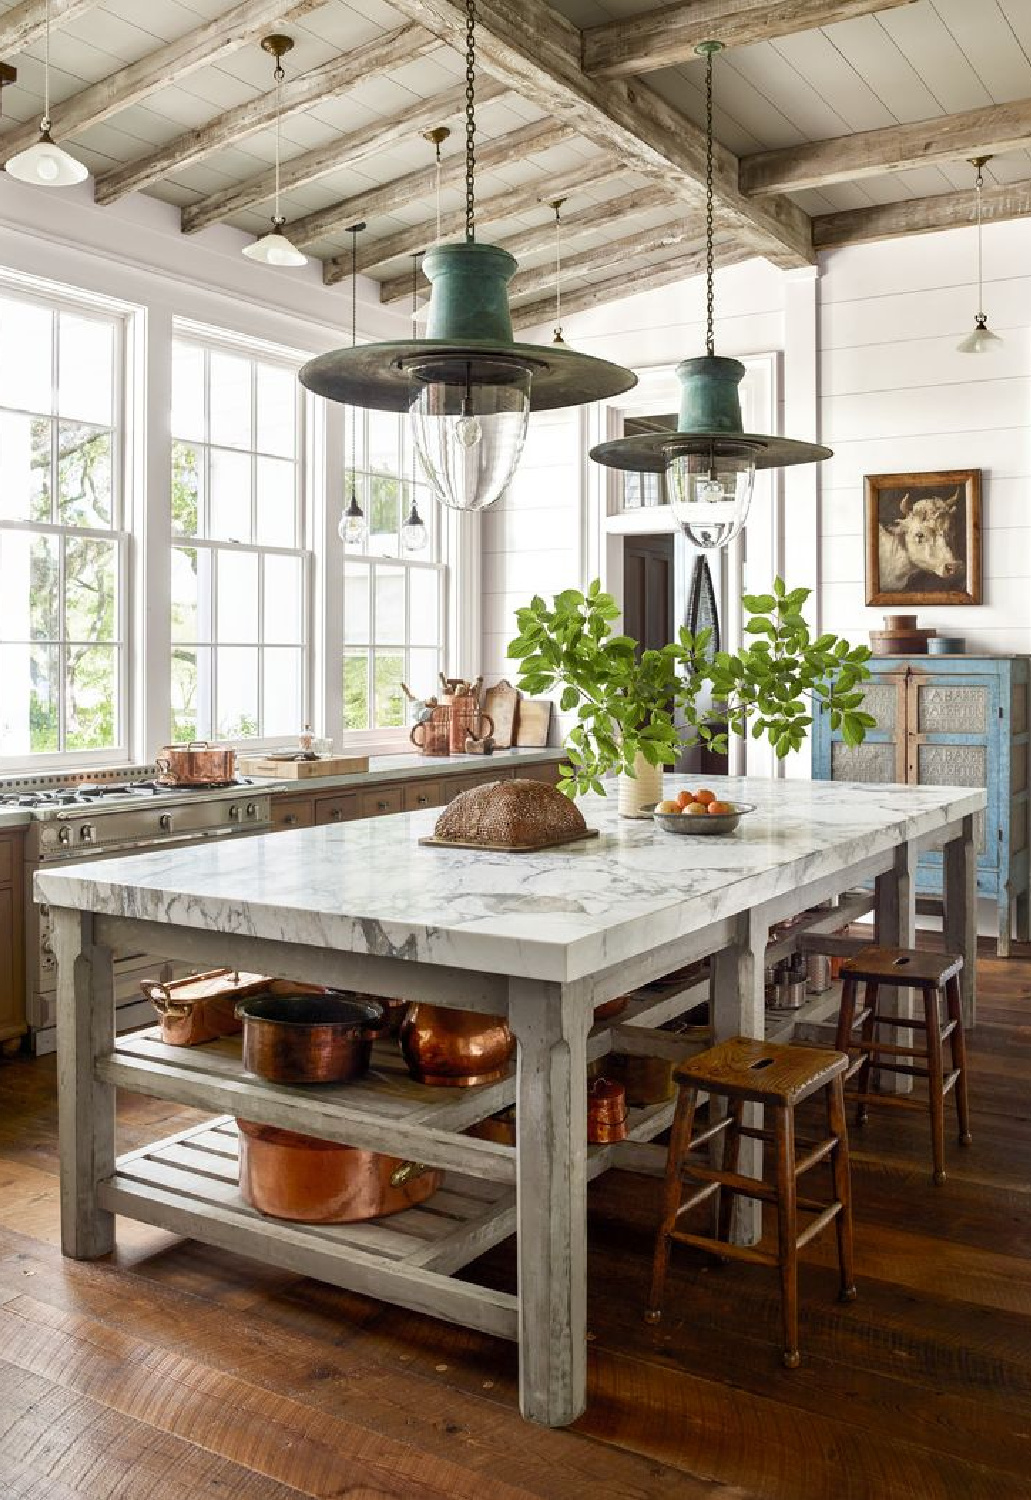 Barbara Westbrook designed kitchen with marble topped table - photo by Eric Piasecki. #rusticelegance #countrykitchens